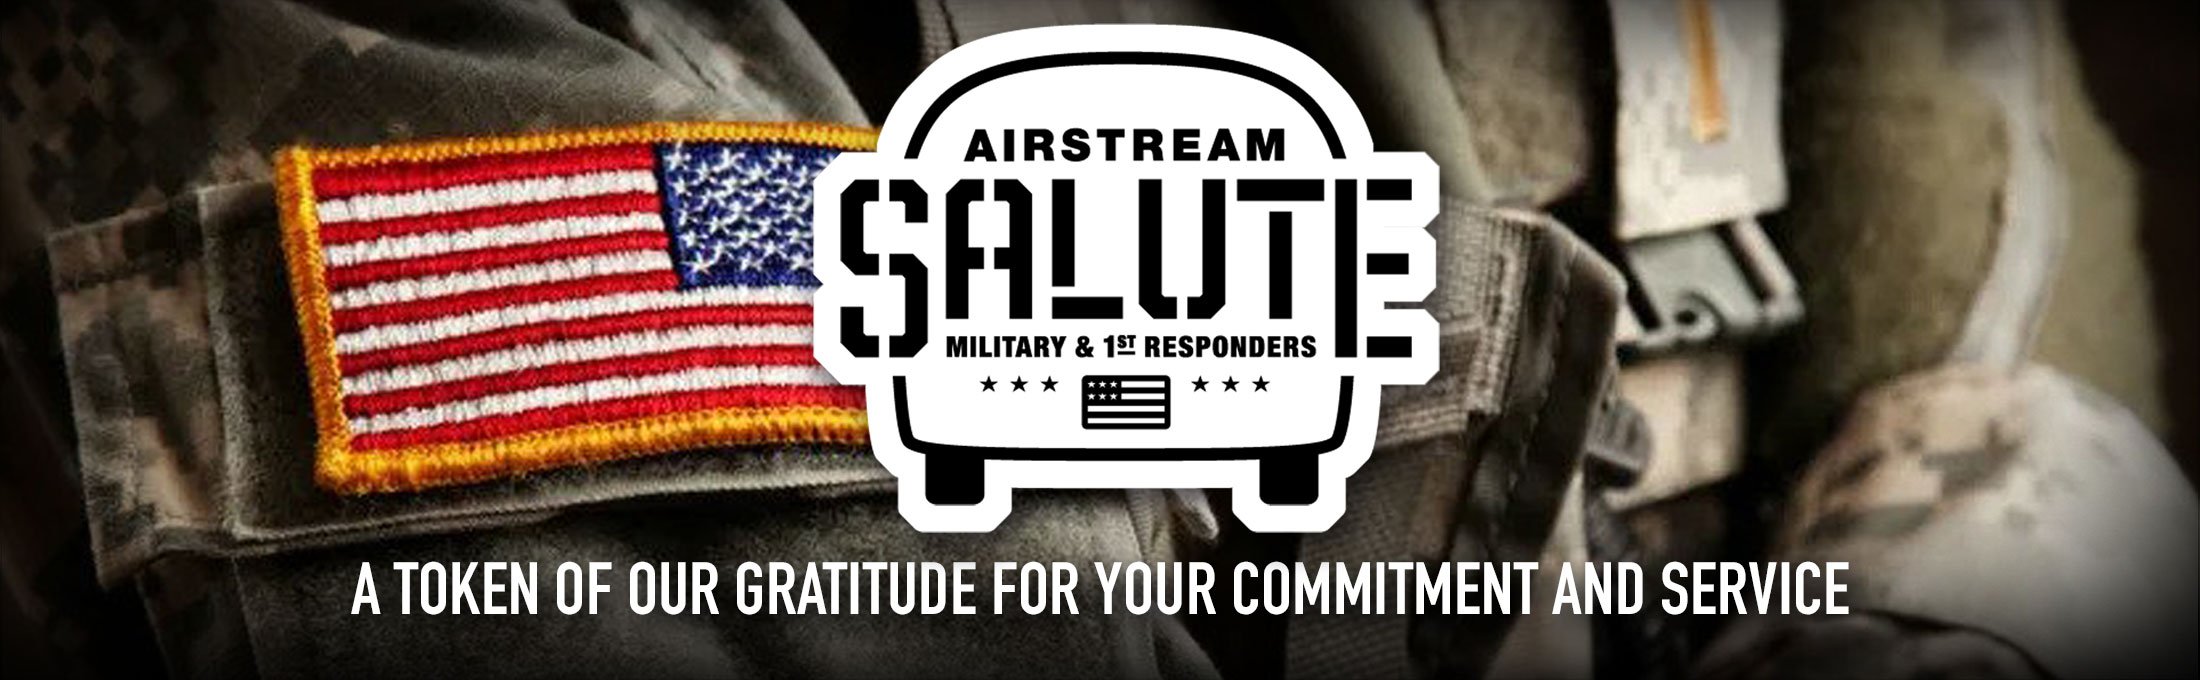 Airstream Salute: A Token of Our Gratitude For Your Commitment and Service.